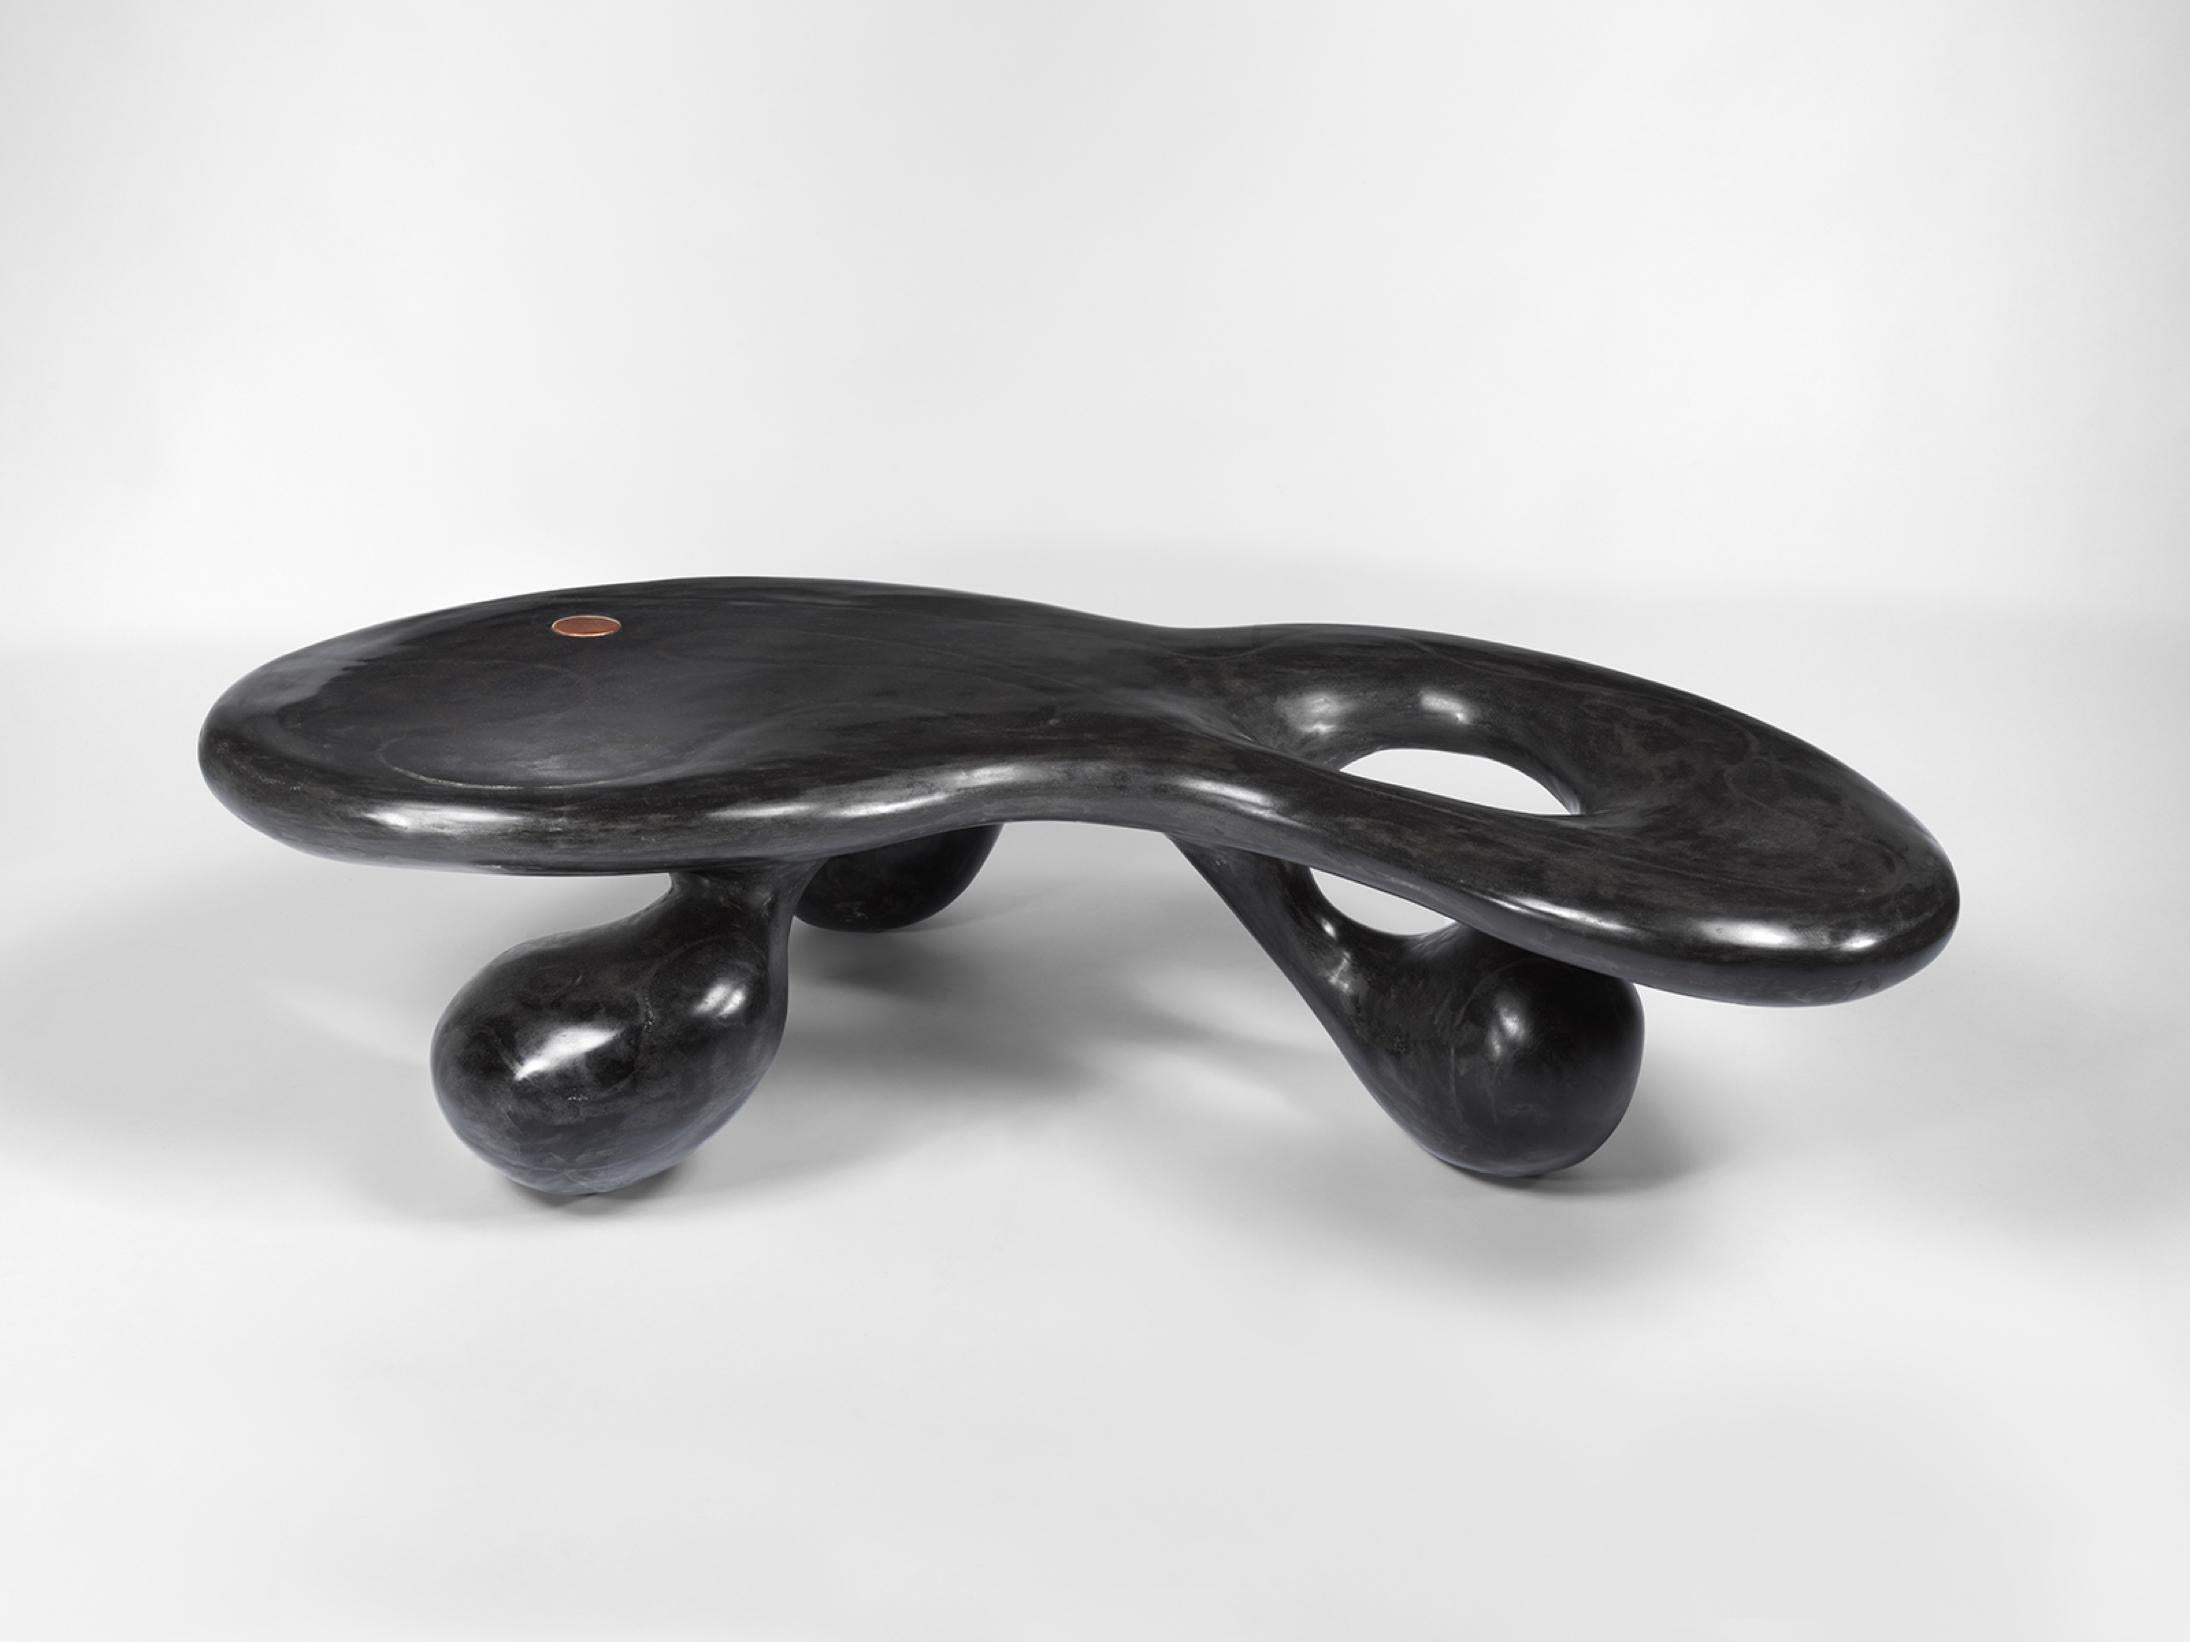 Three-legged coffee table. Black-tinted gypsum. Designed and made by Rogan Gregory, 2021, USA.